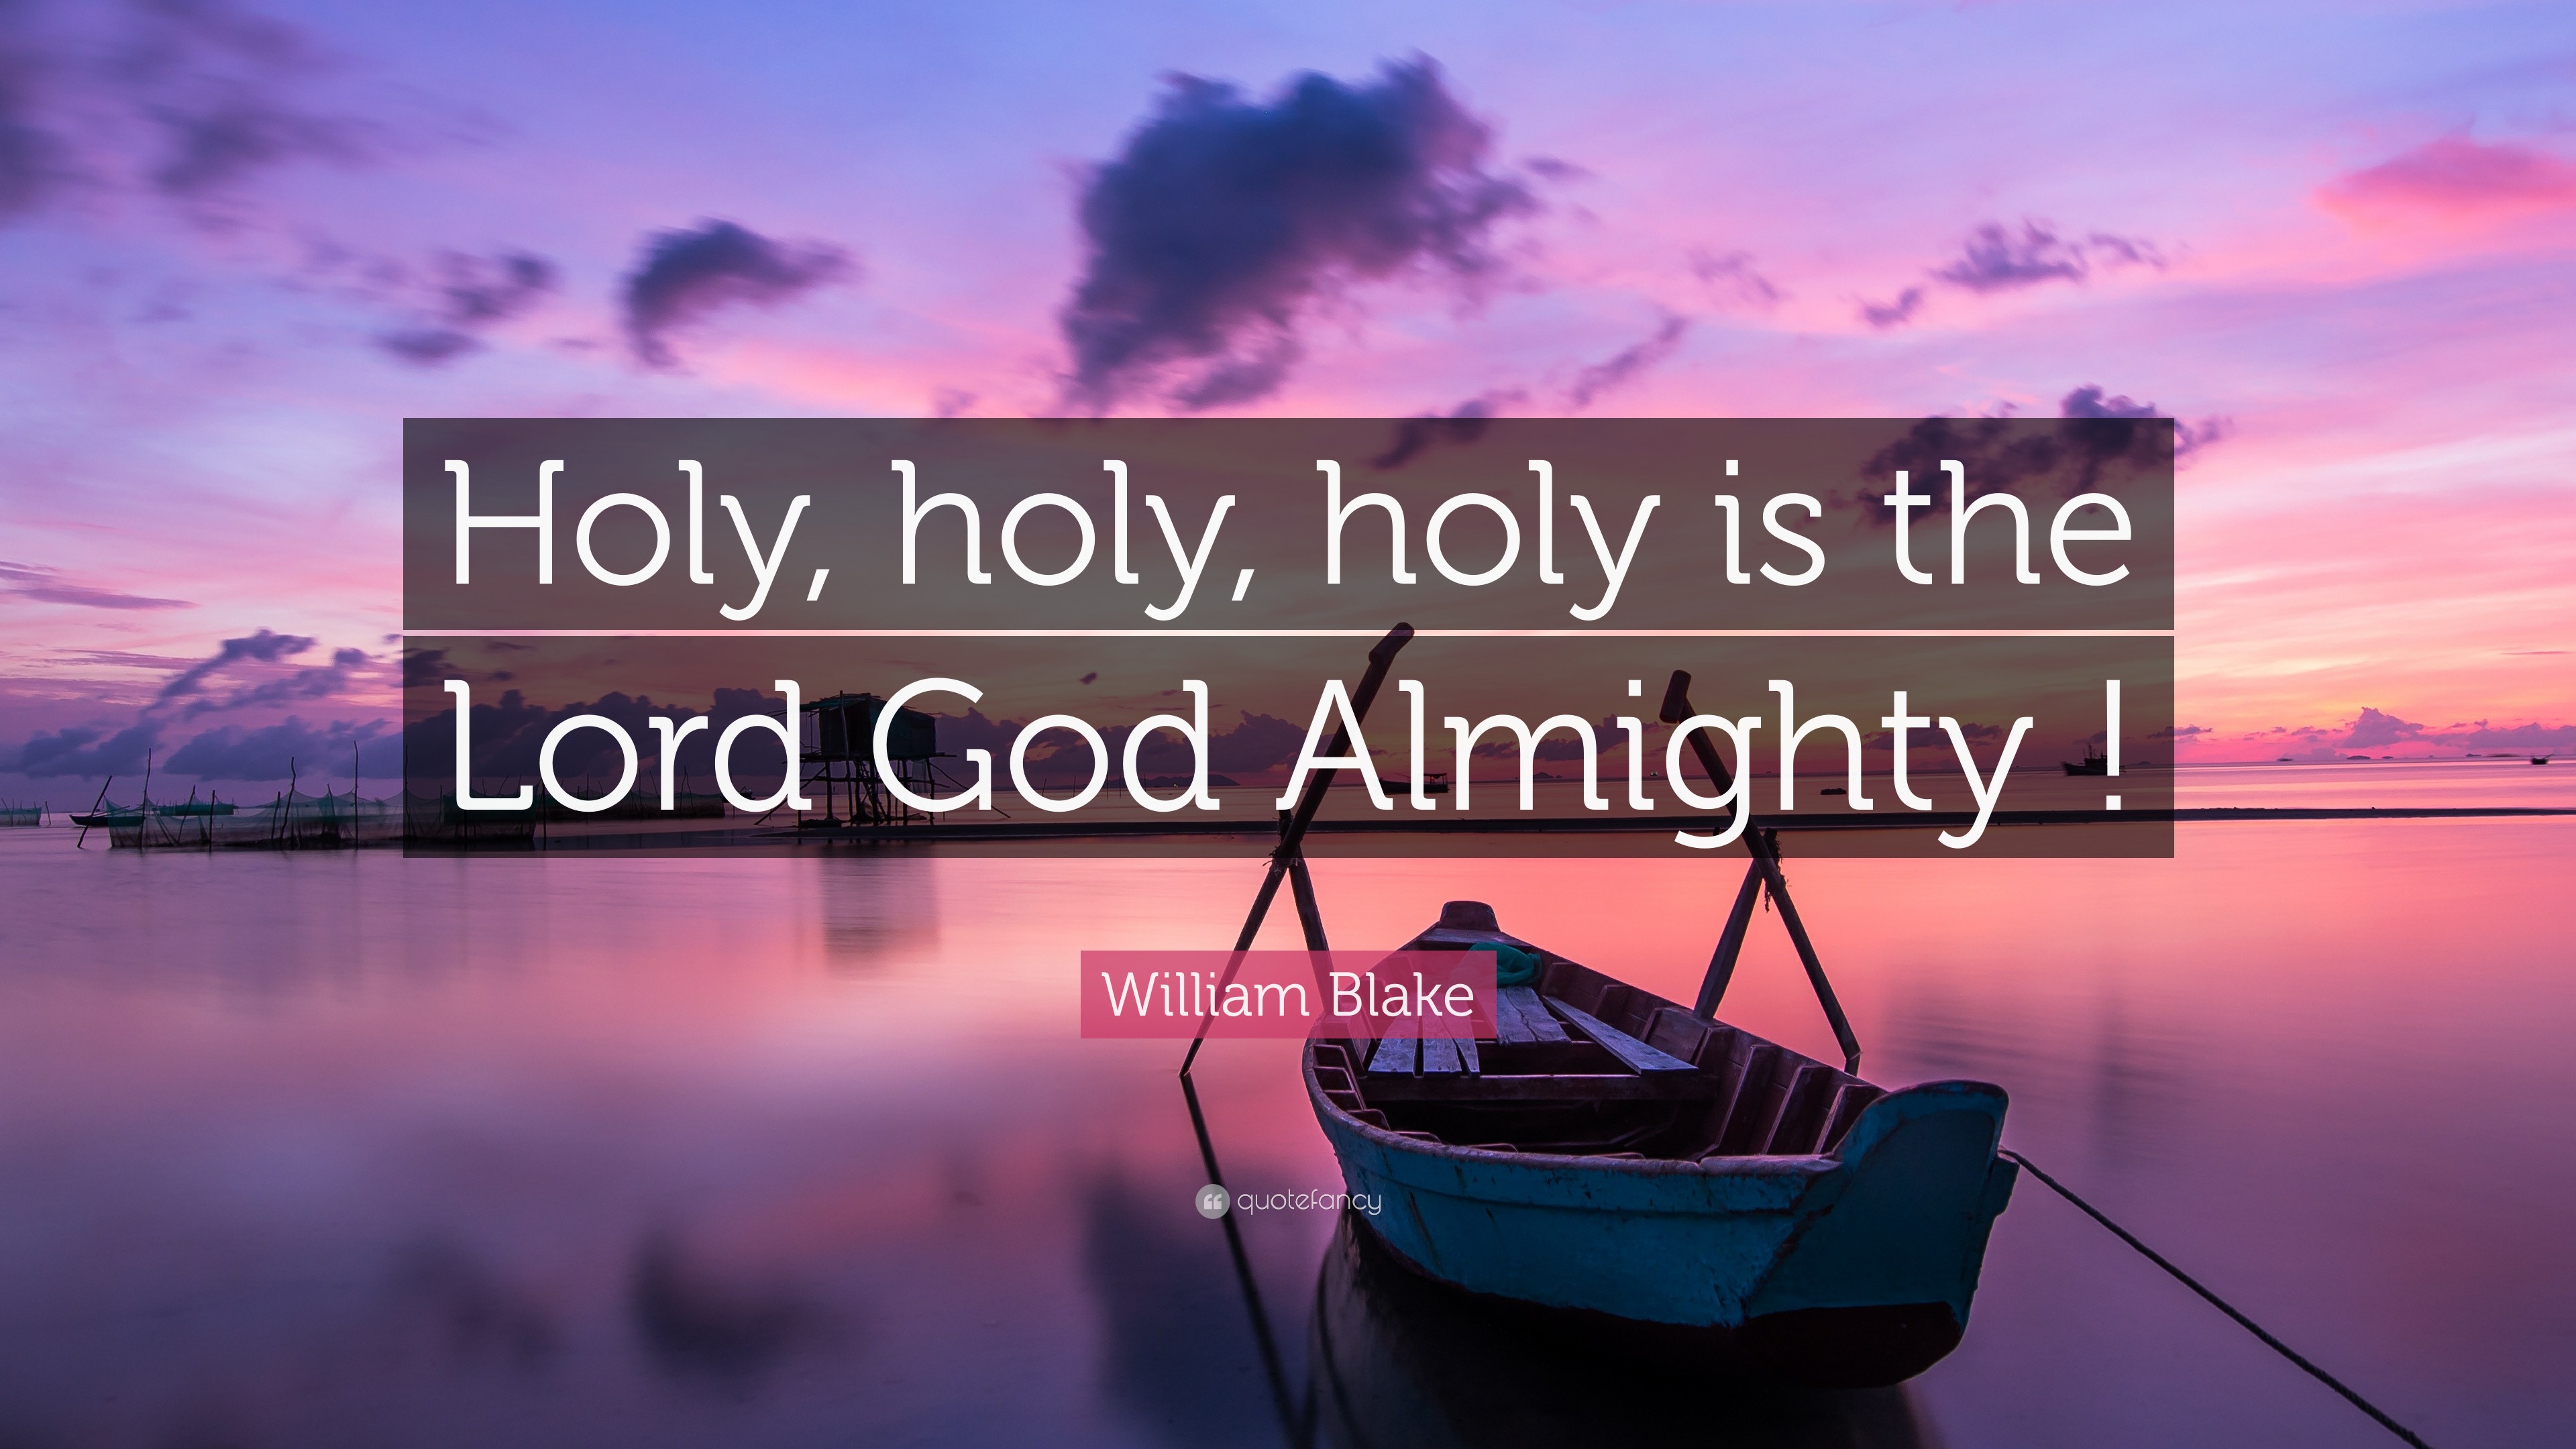 William Blake Quote “holy Holy Holy Is The Lord God Almighty